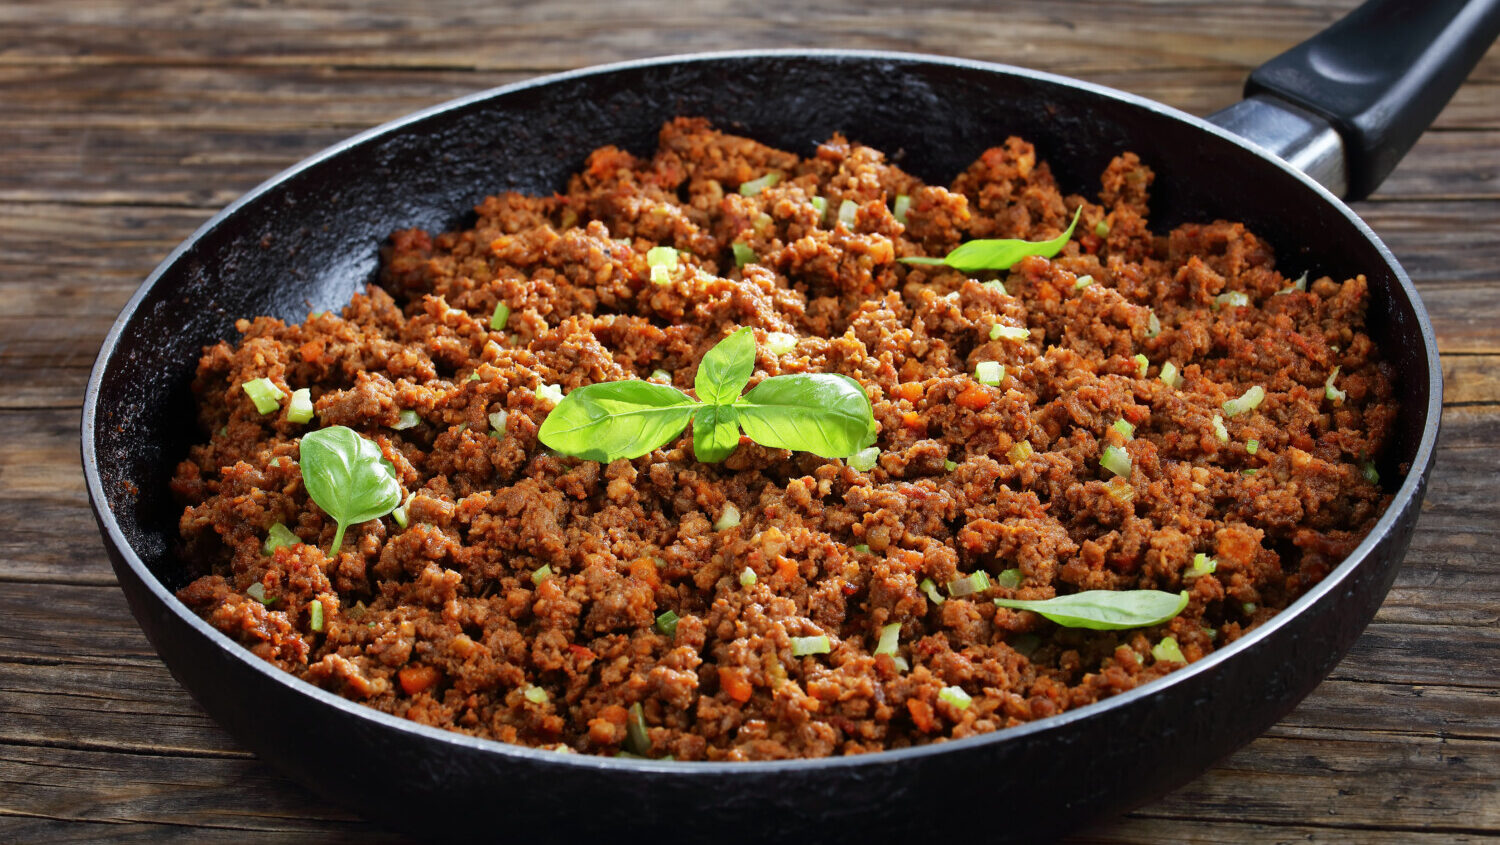 Ground beef browning in pan